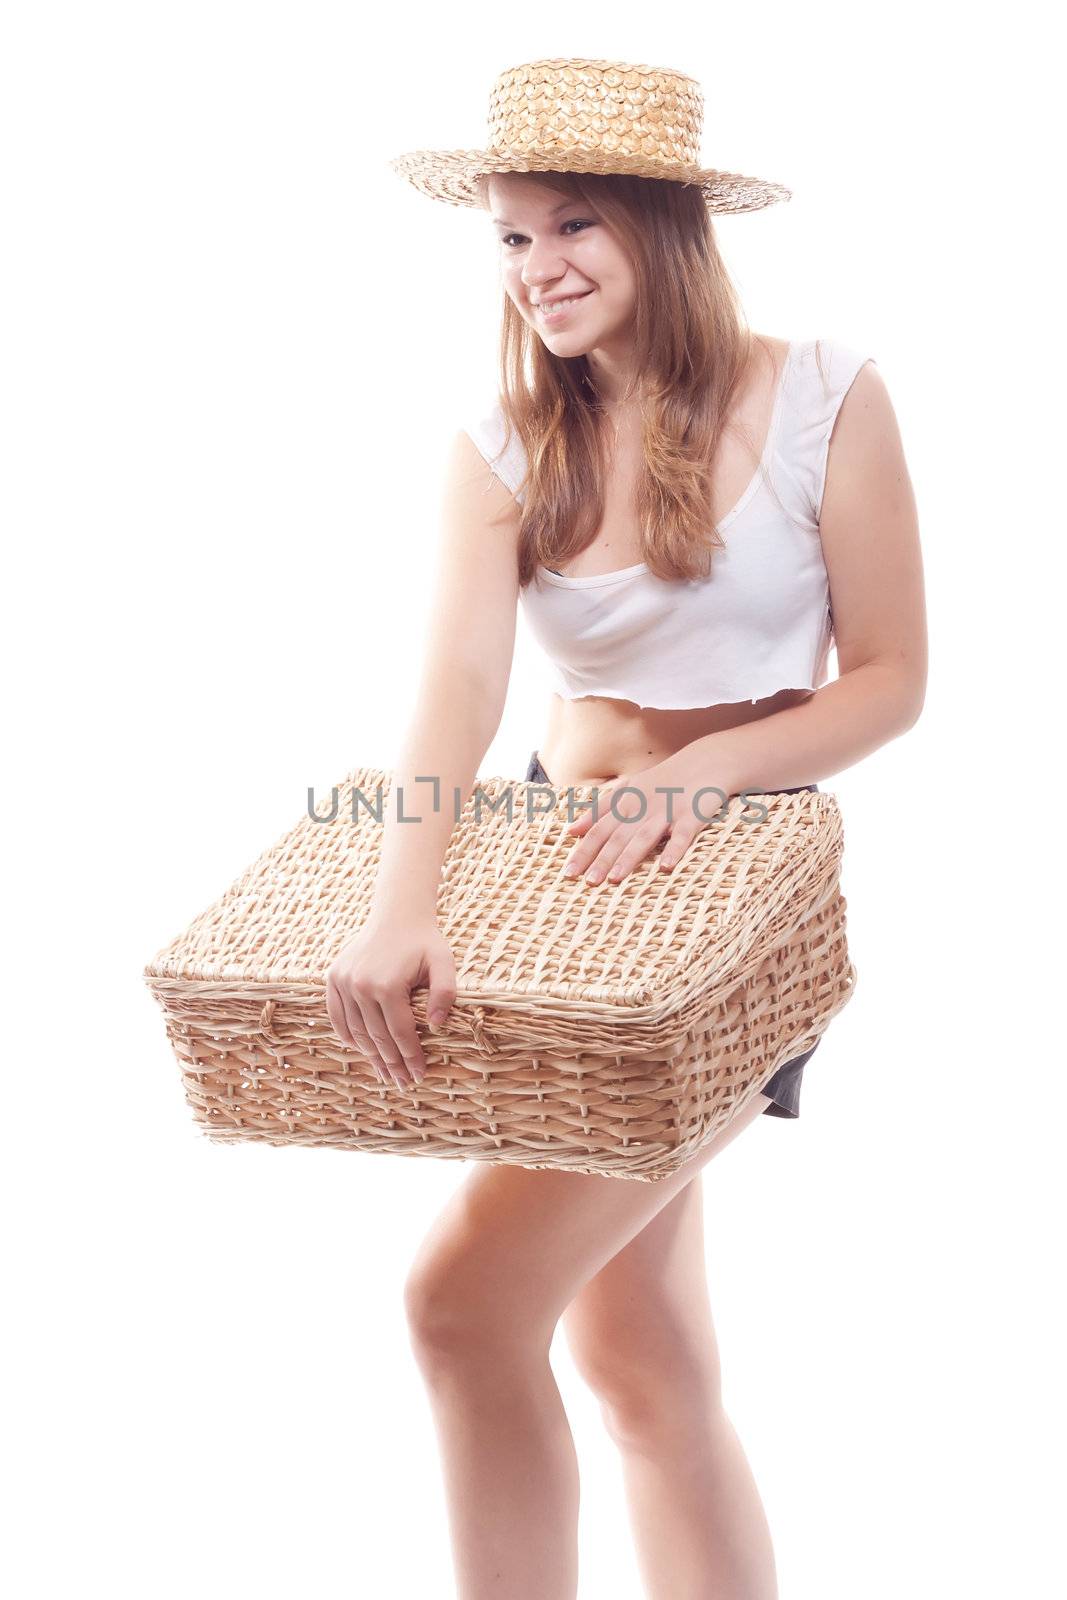 A girl in a straw hat with a straw suitcase by victosha